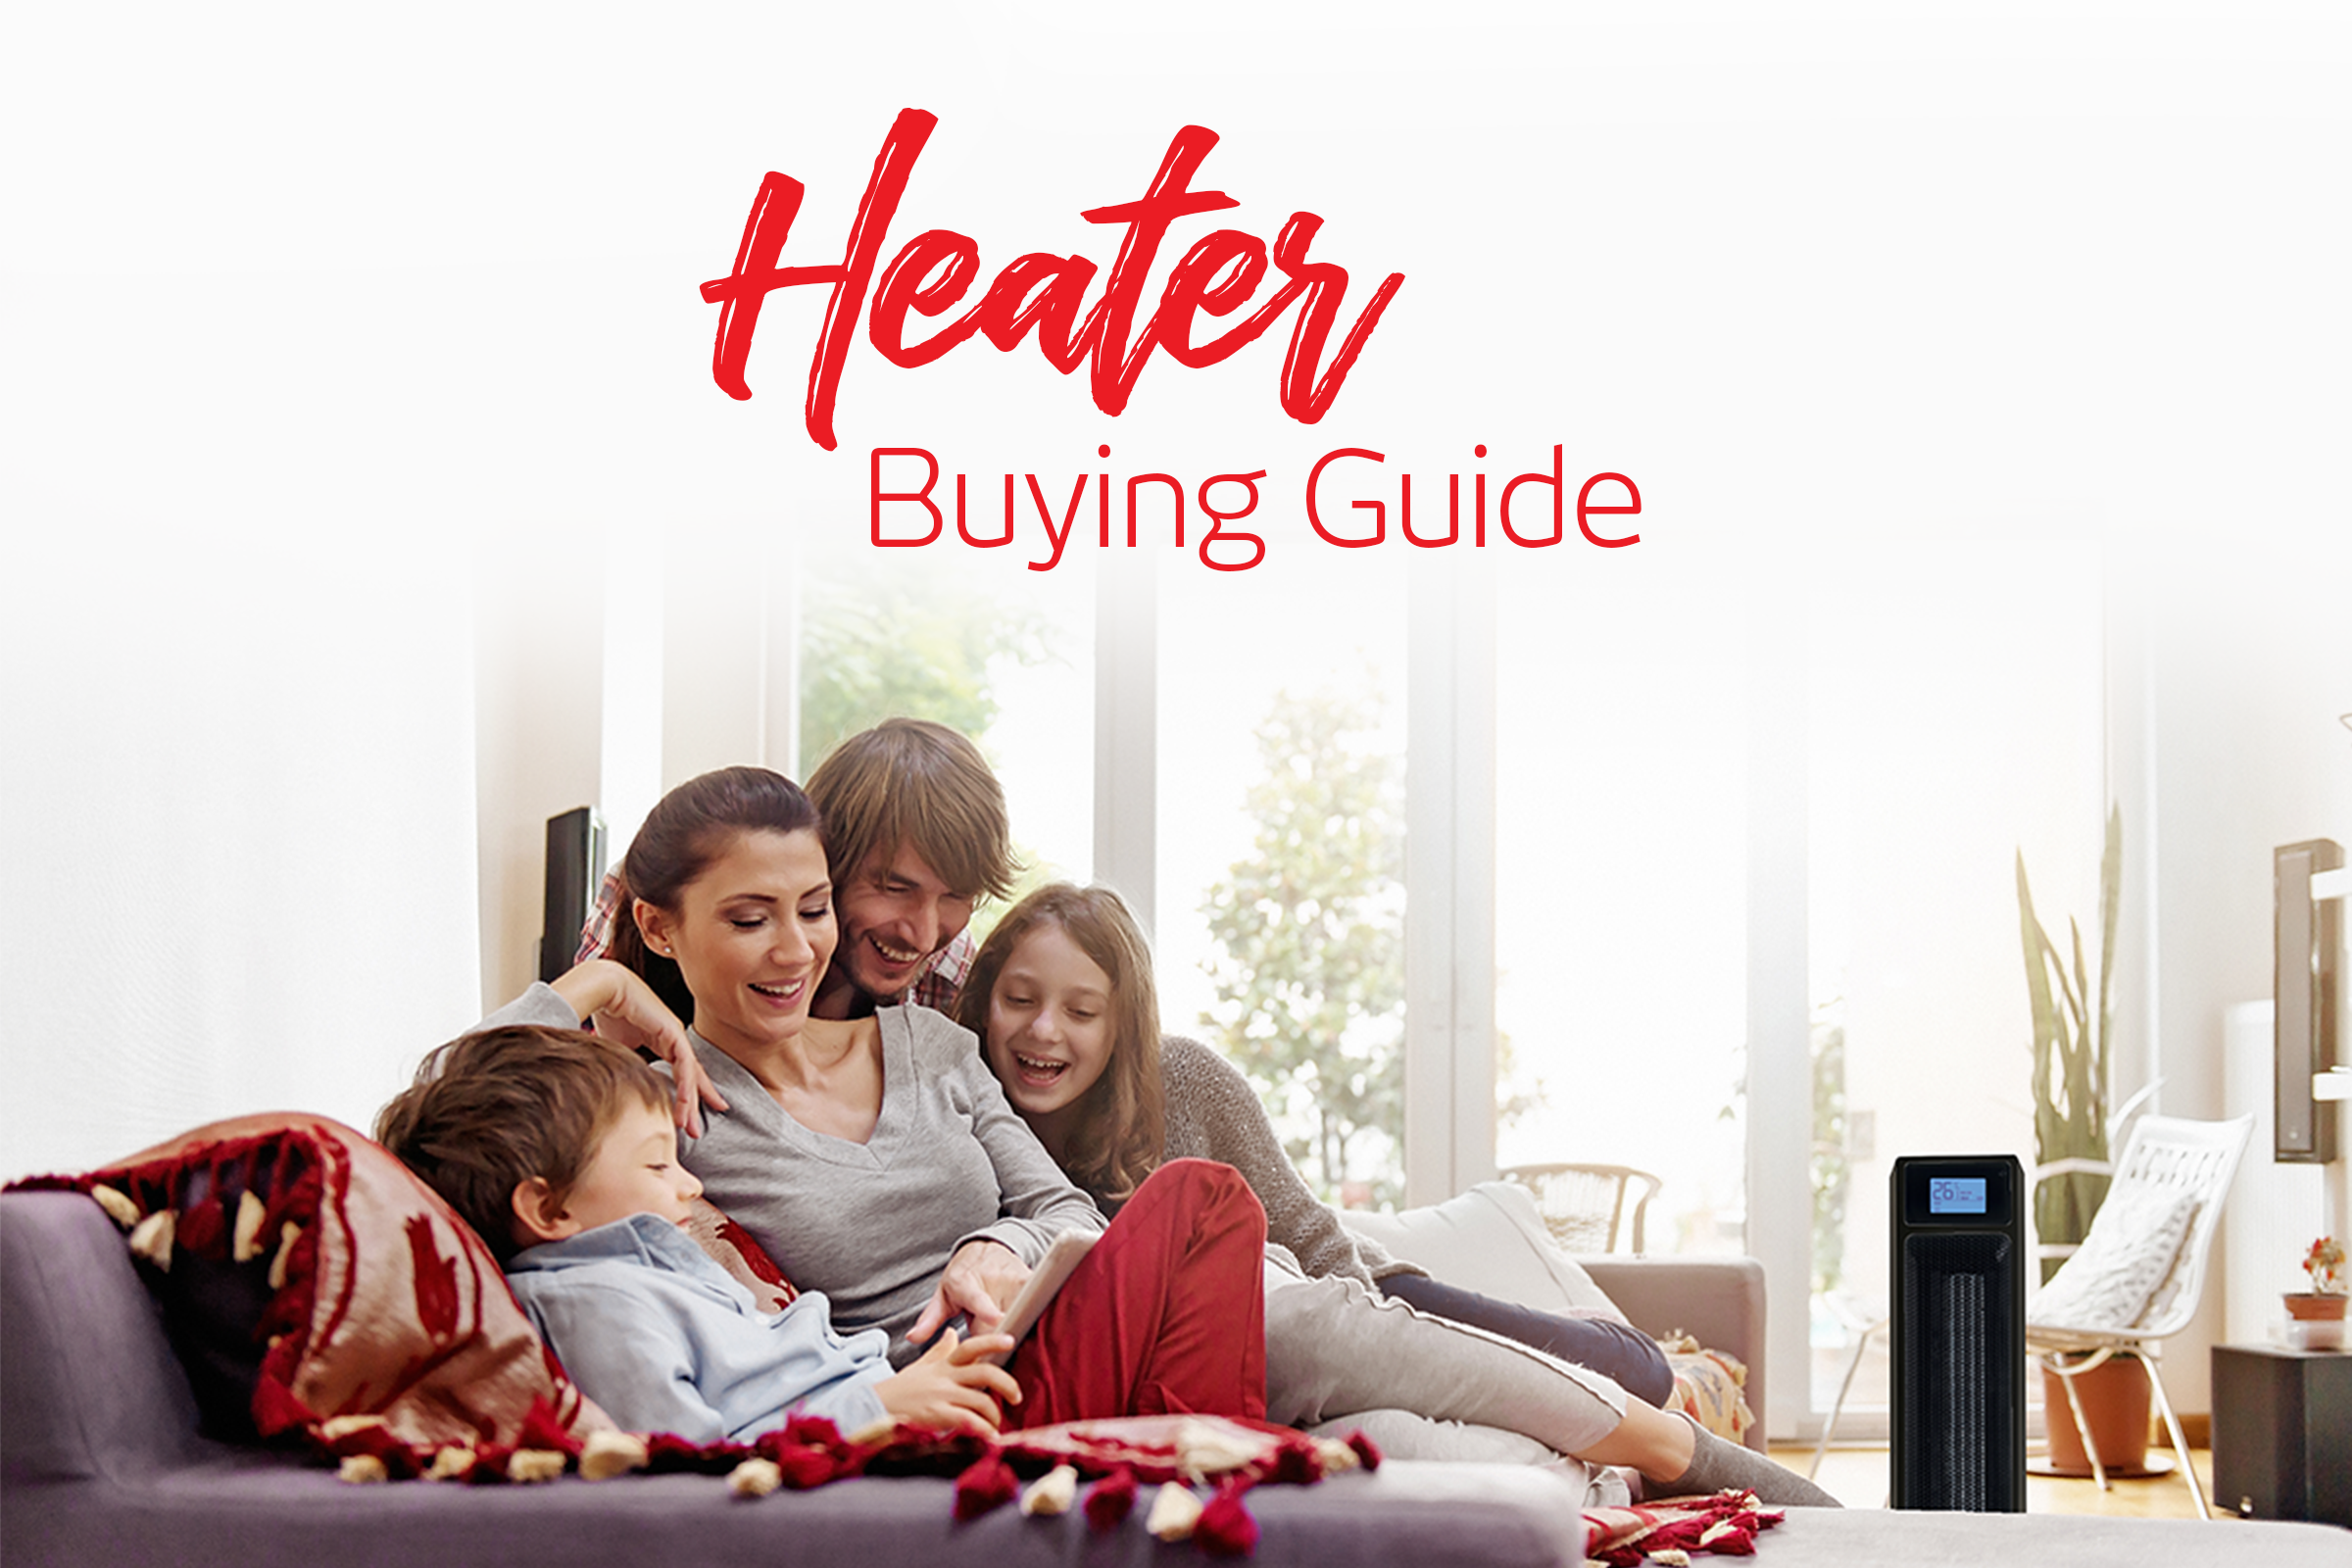 Heater Buying Guide